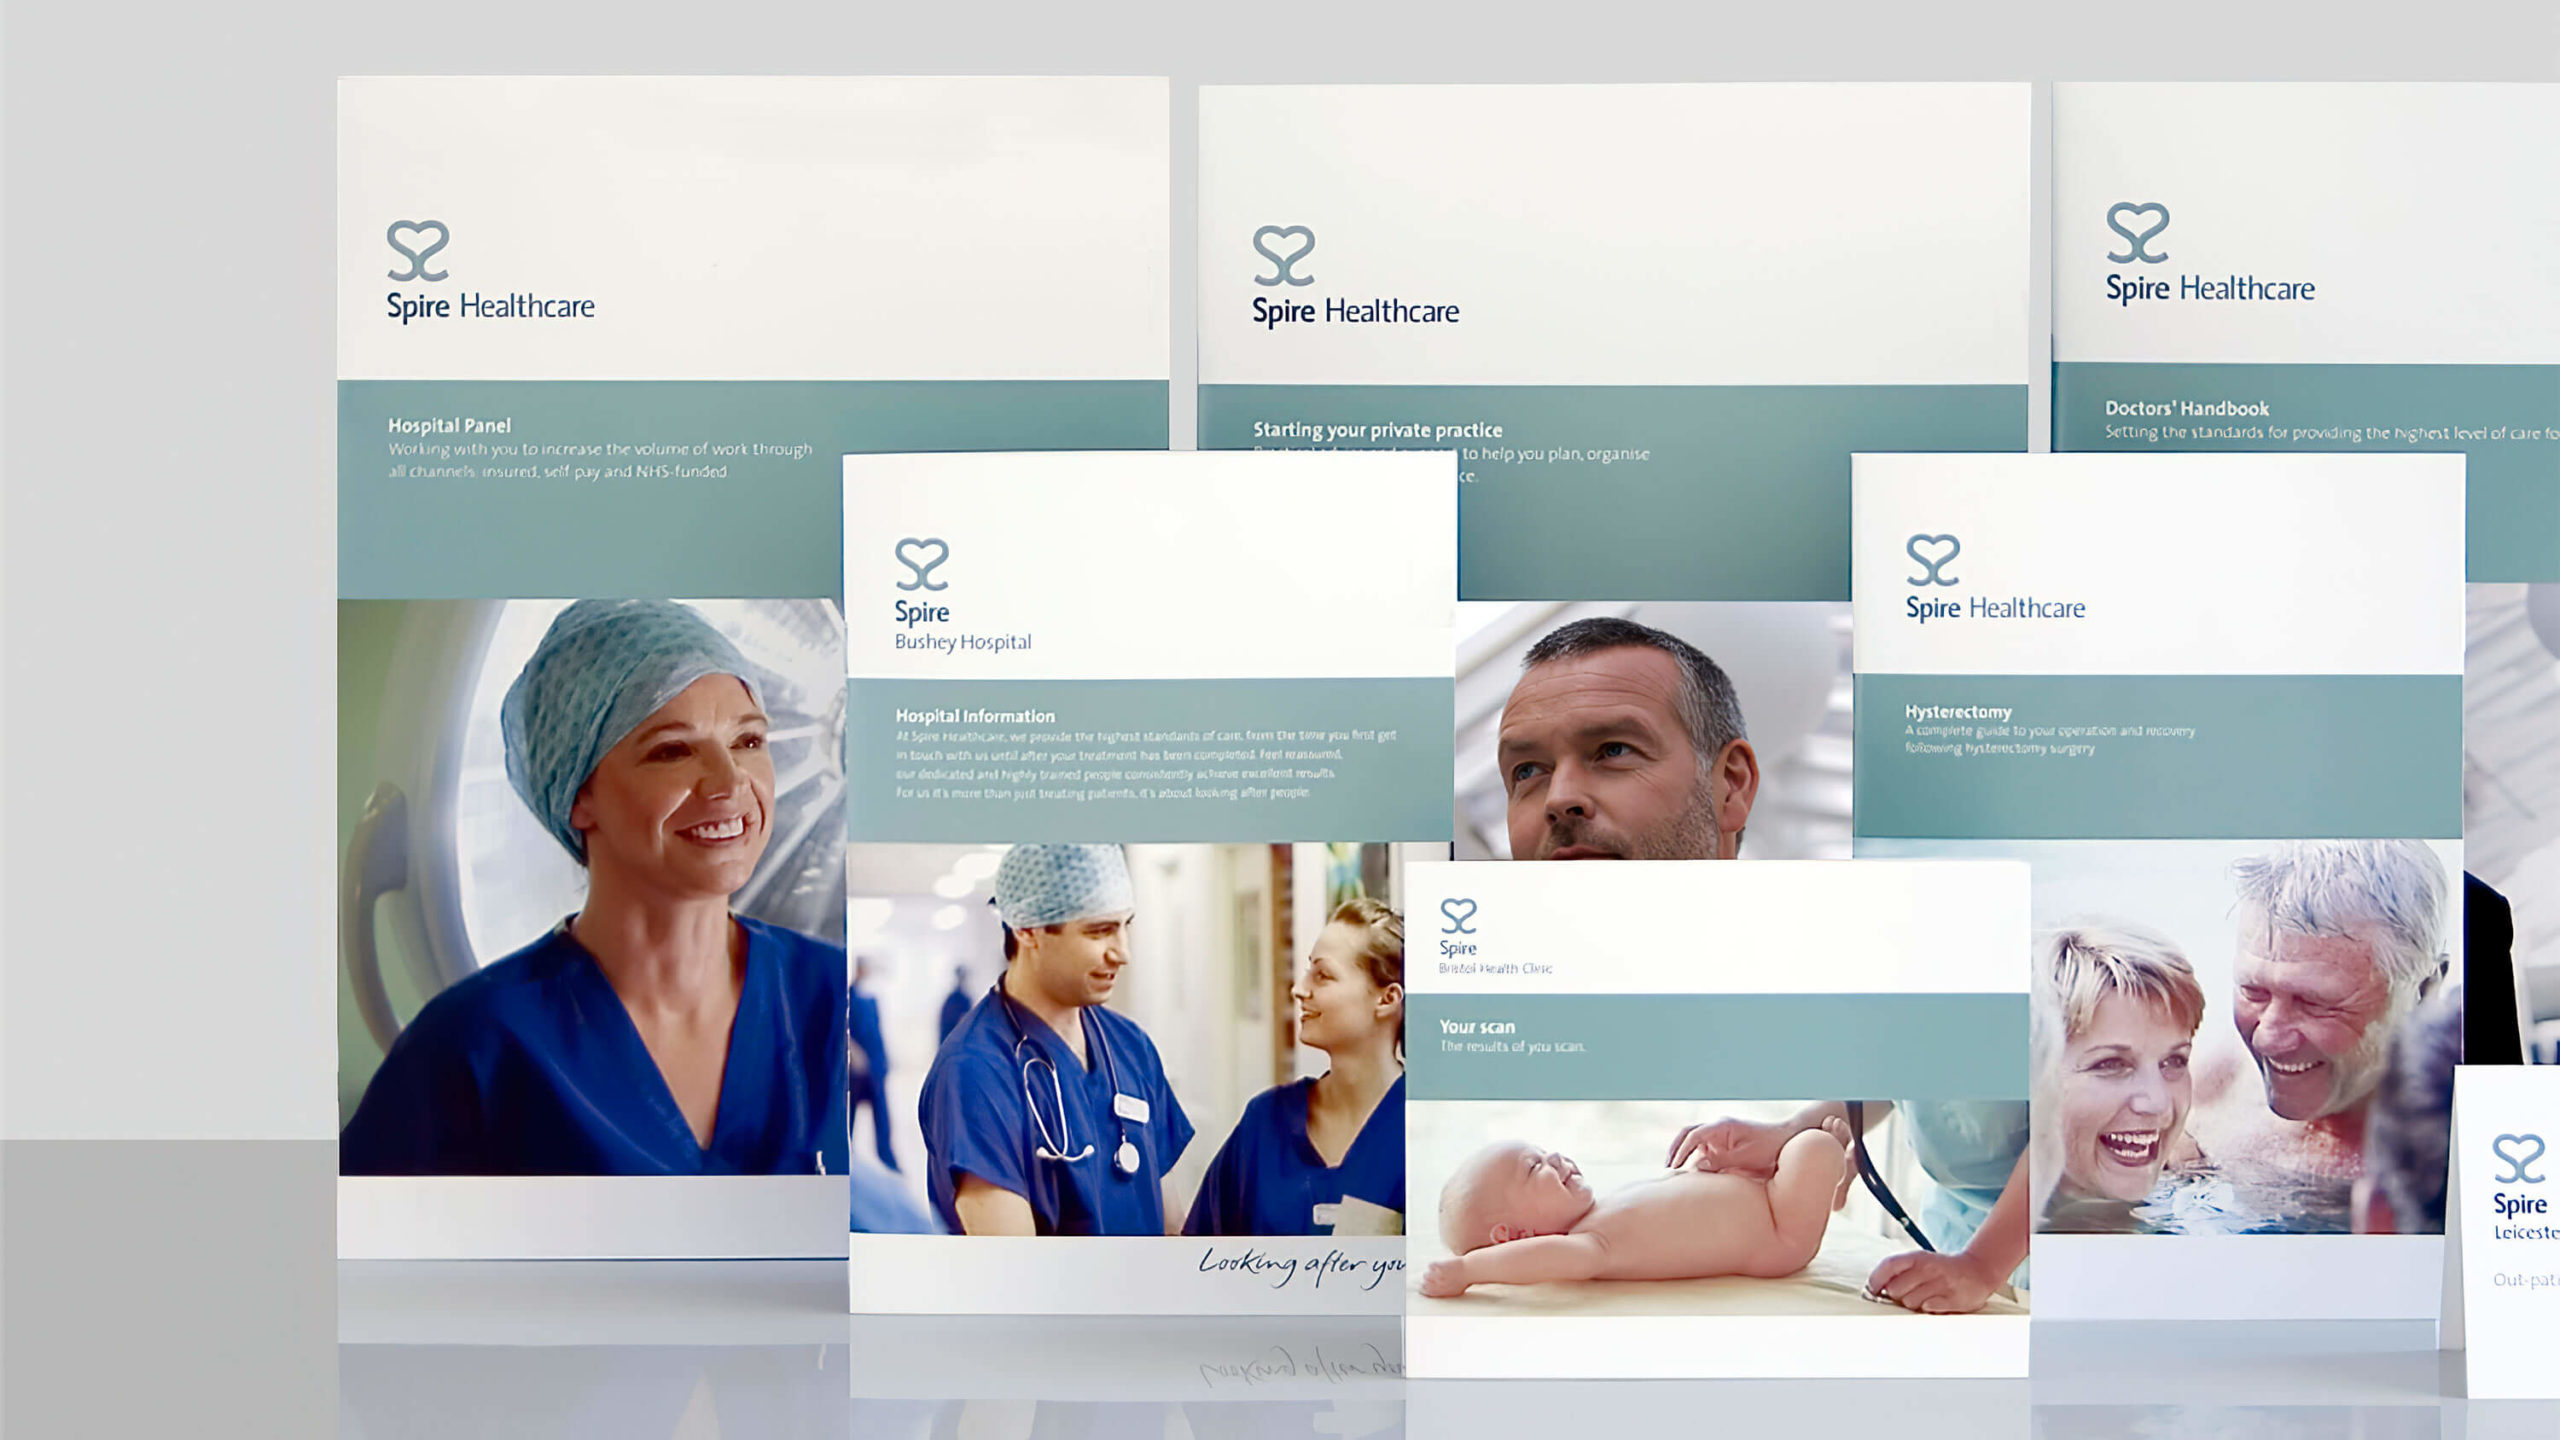 Spire Healthcare brand across printed collateral